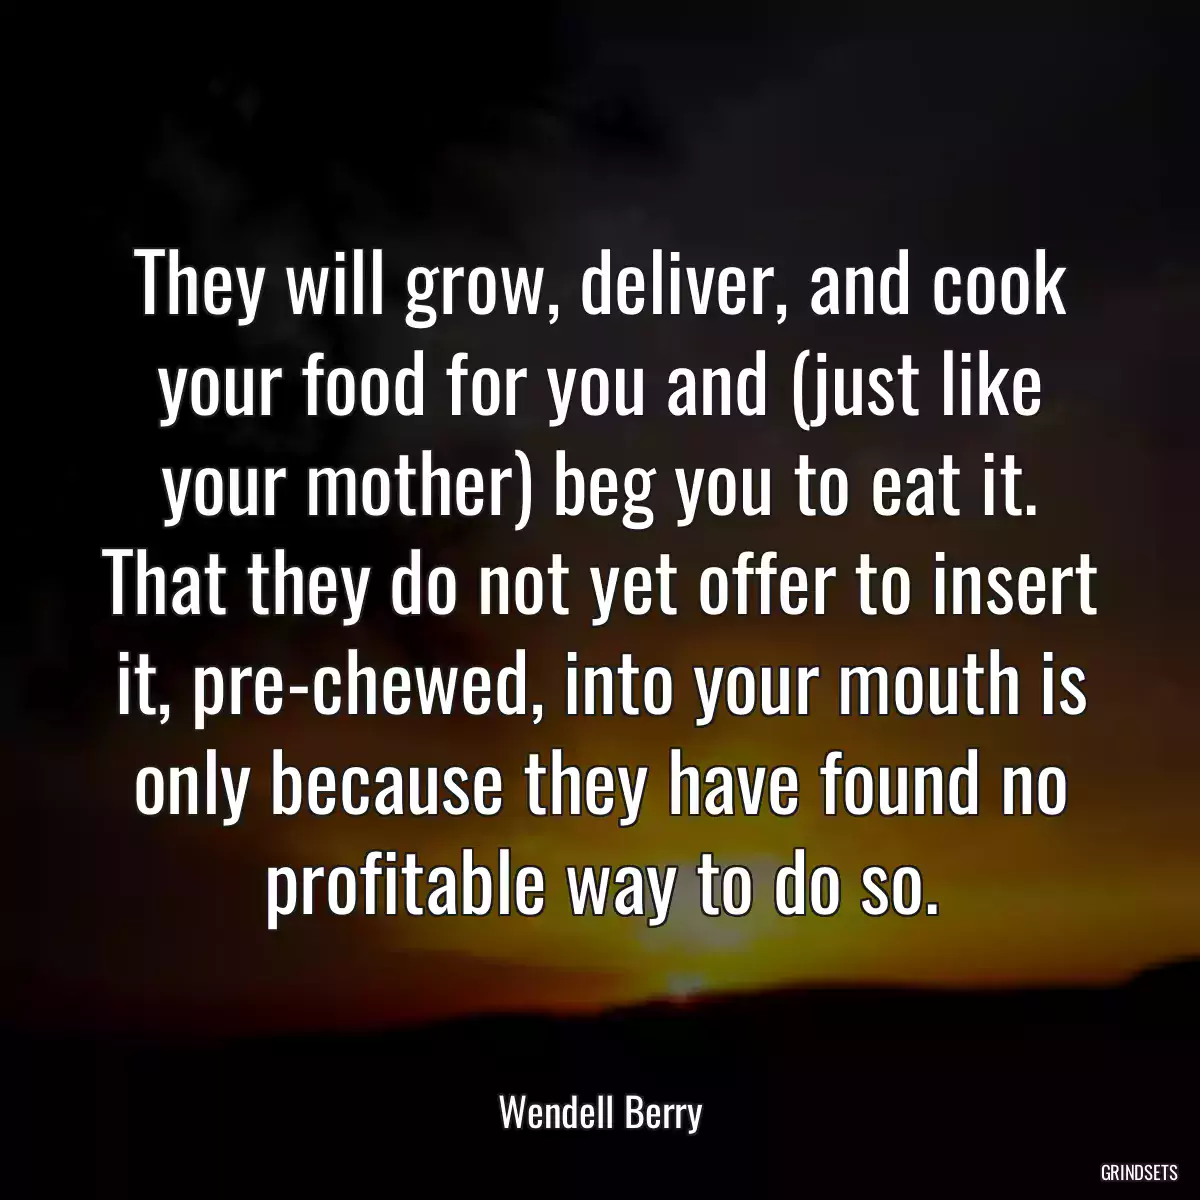 They will grow, deliver, and cook your food for you and (just like your mother) beg you to eat it. That they do not yet offer to insert it, pre-chewed, into your mouth is only because they have found no profitable way to do so.